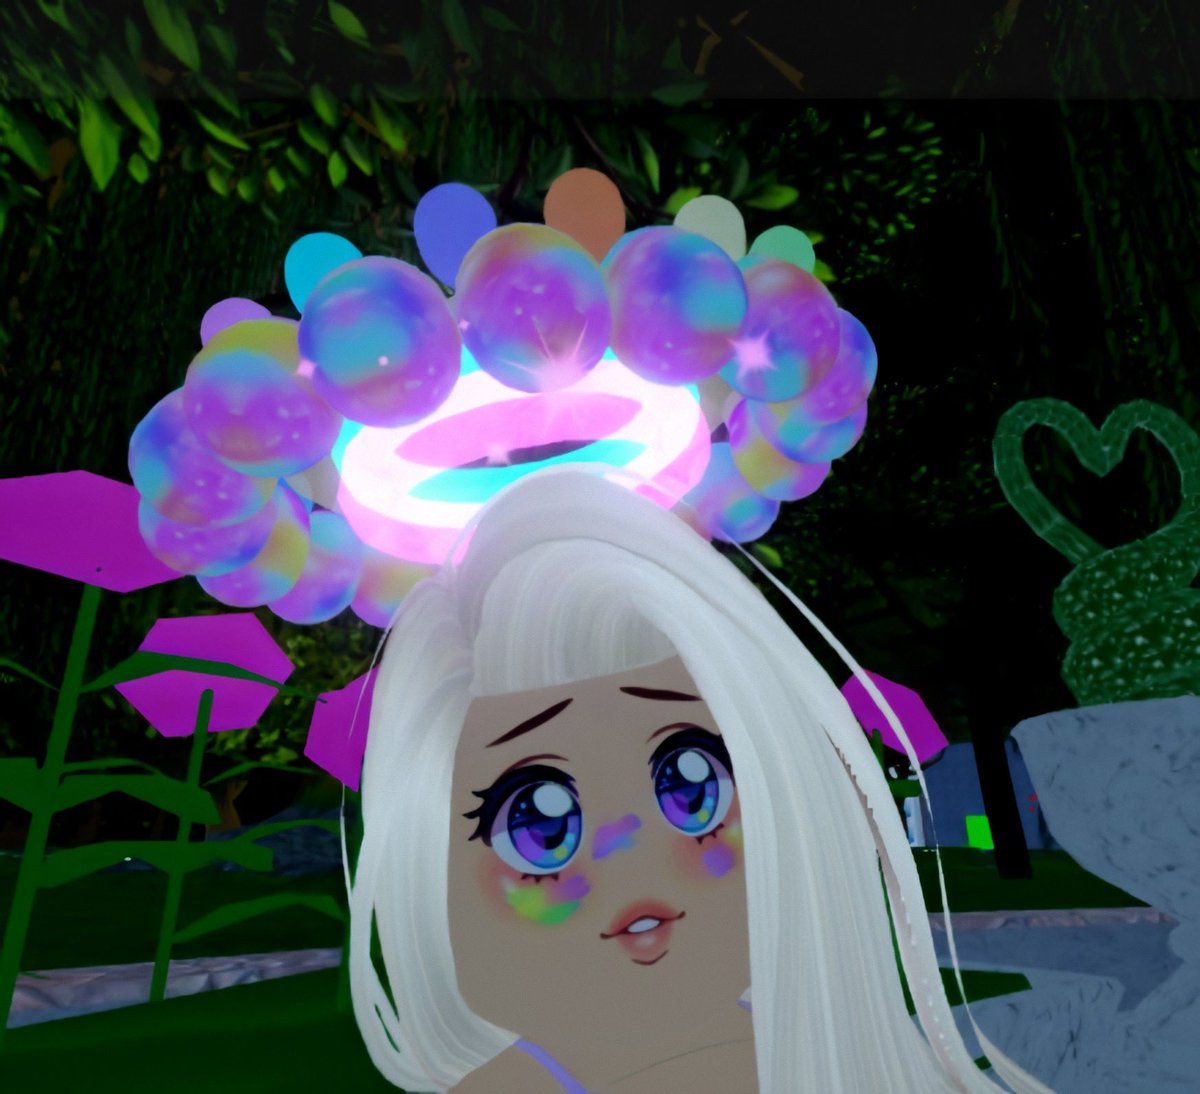 Royale High On Twitter Offers For The Easter Halo Again Looking For A Decent Halo Good Adds Not Looking For Diamonds Non Halo Robux Offers Royalehigh Roblox Royalehightrading Robloxgaming Easterhalo Royalehighhalo Trading - roblox robux easter